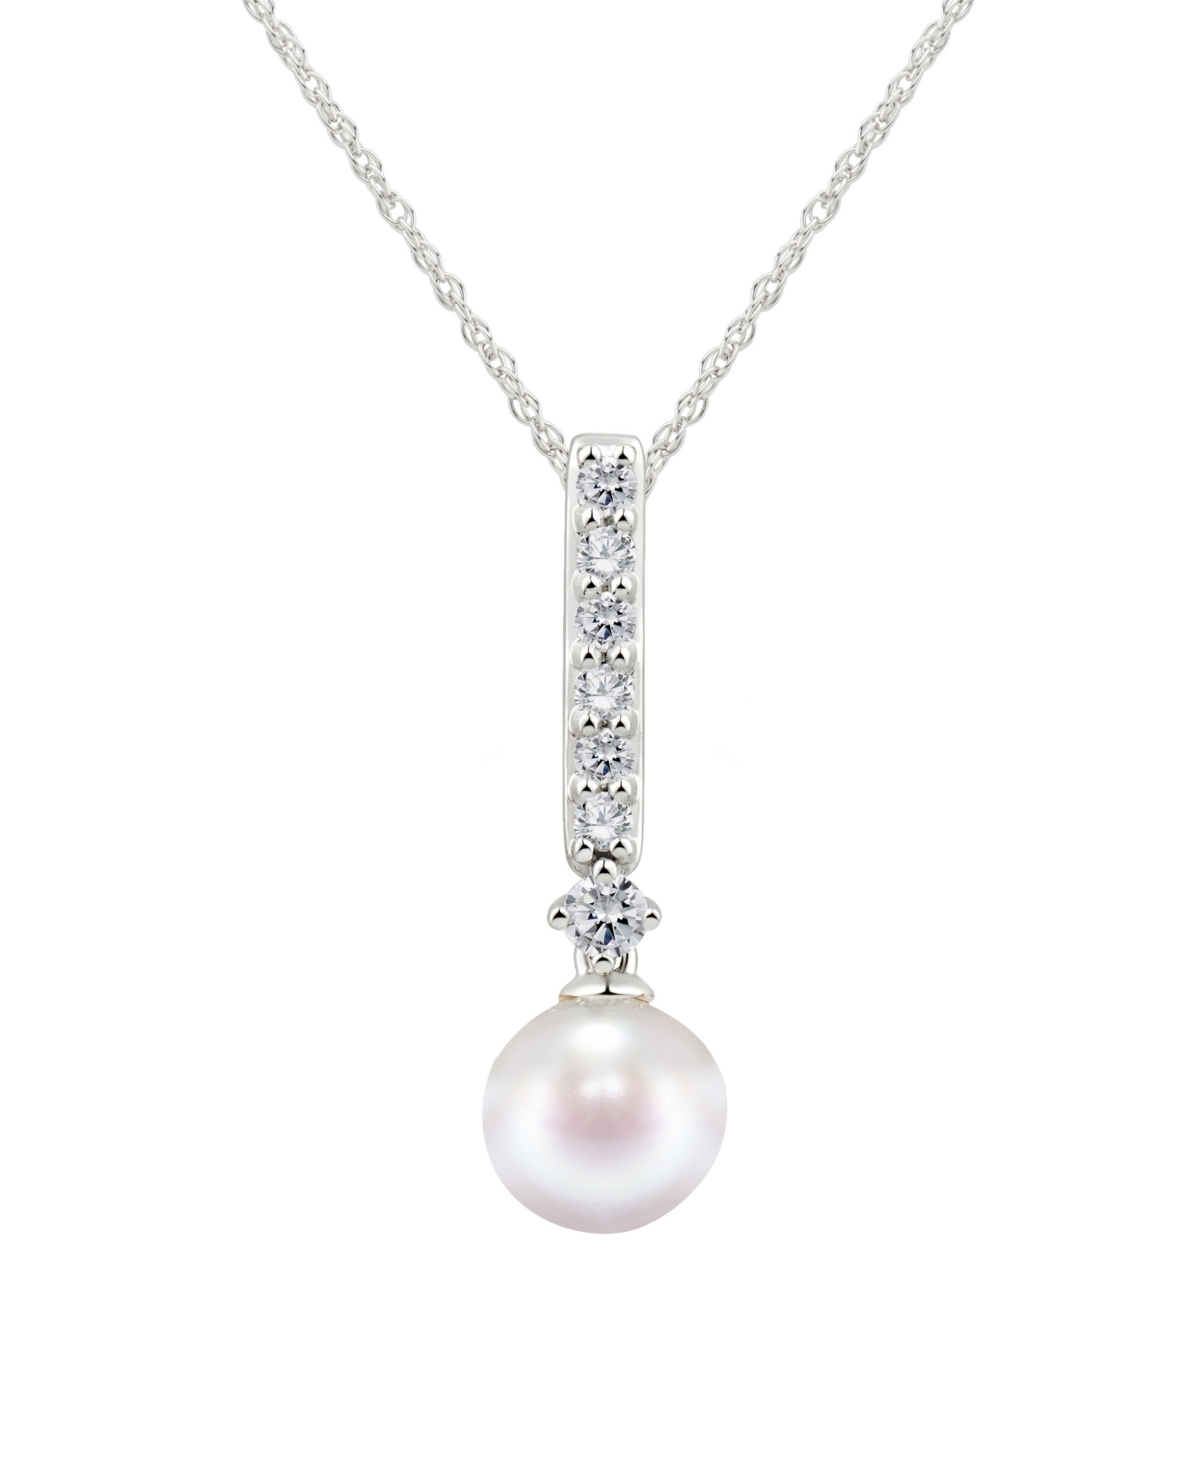 Cultured Freshwater Pearl 7-7.5mm and Diamond 1/5 ct. tw. Pendant 18" Necklace in 14k White Gold (Also Available in 14k Yellow or 14k Rose Gold